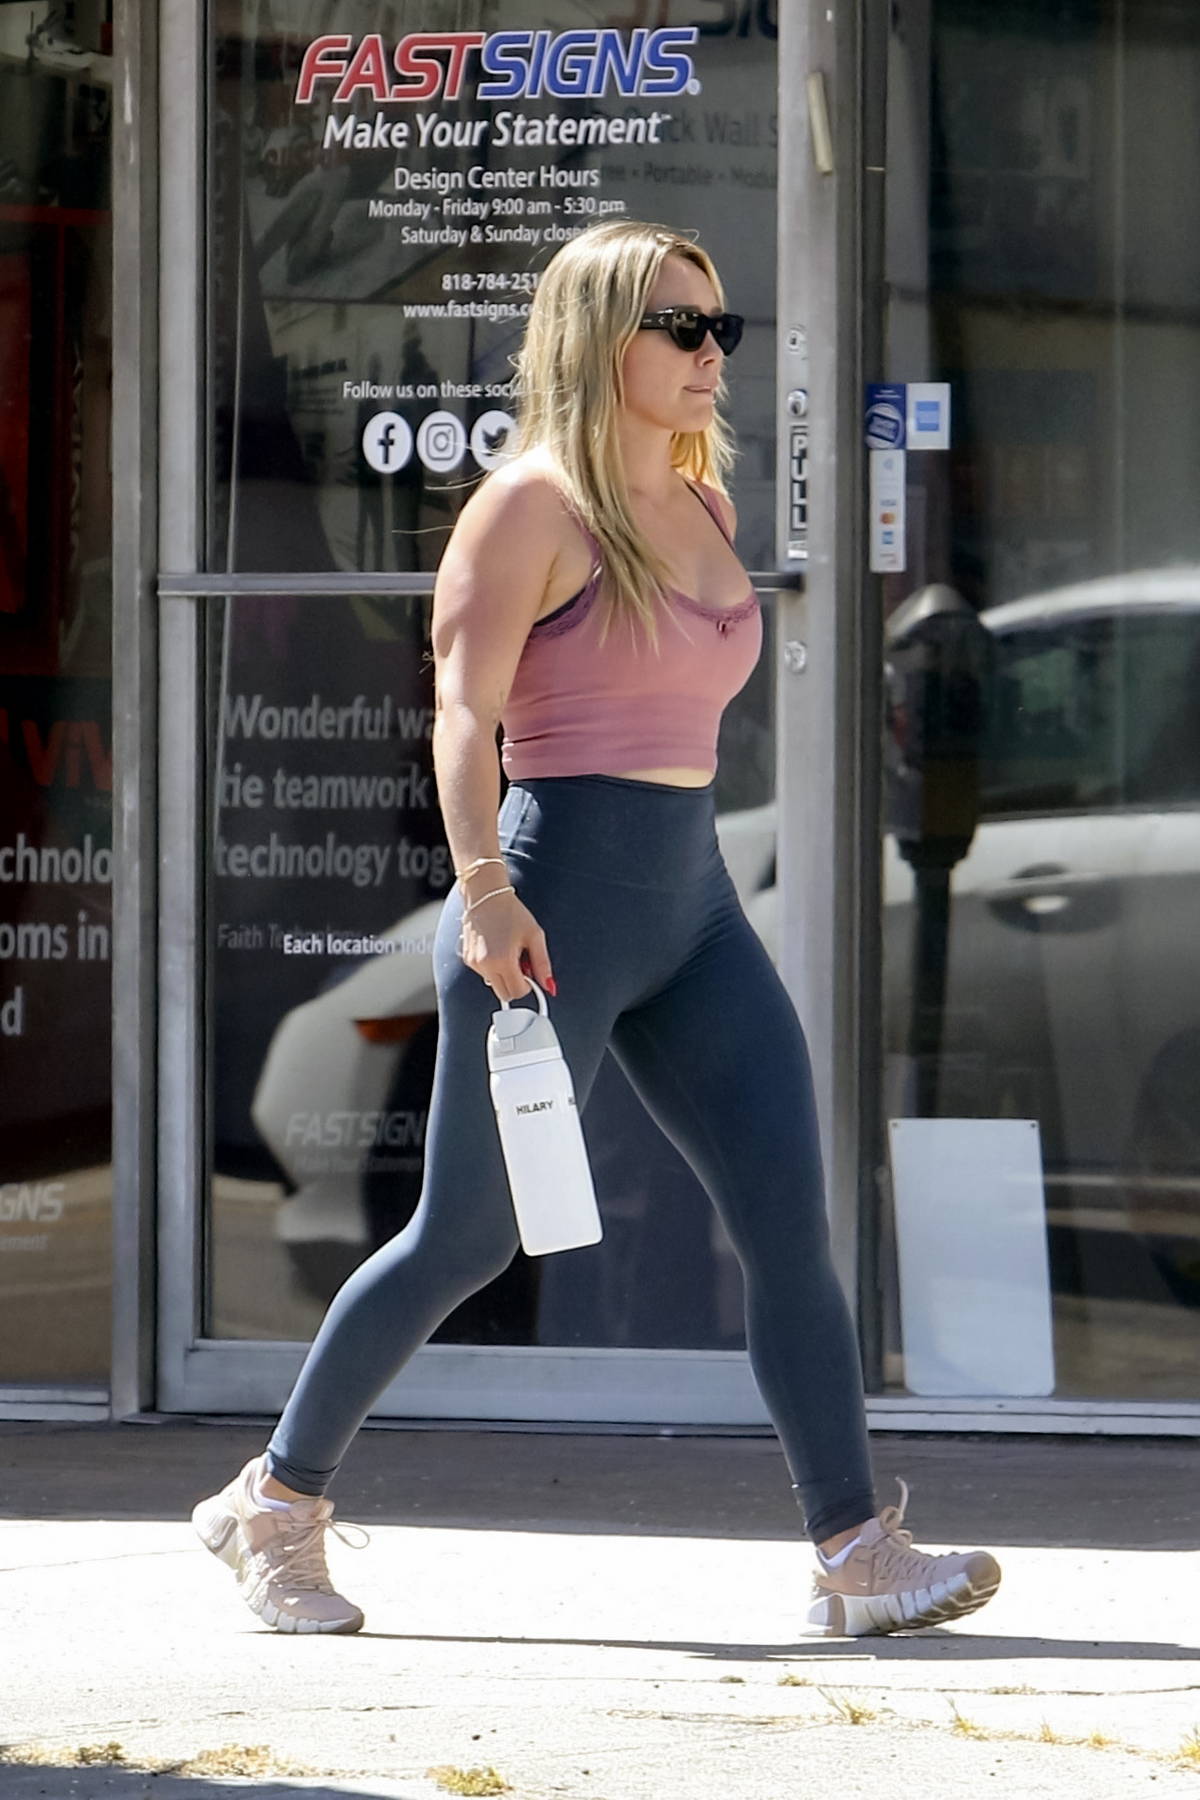 Hilary Duff flaunts her curves in a workout top and leggings during a  workout session at